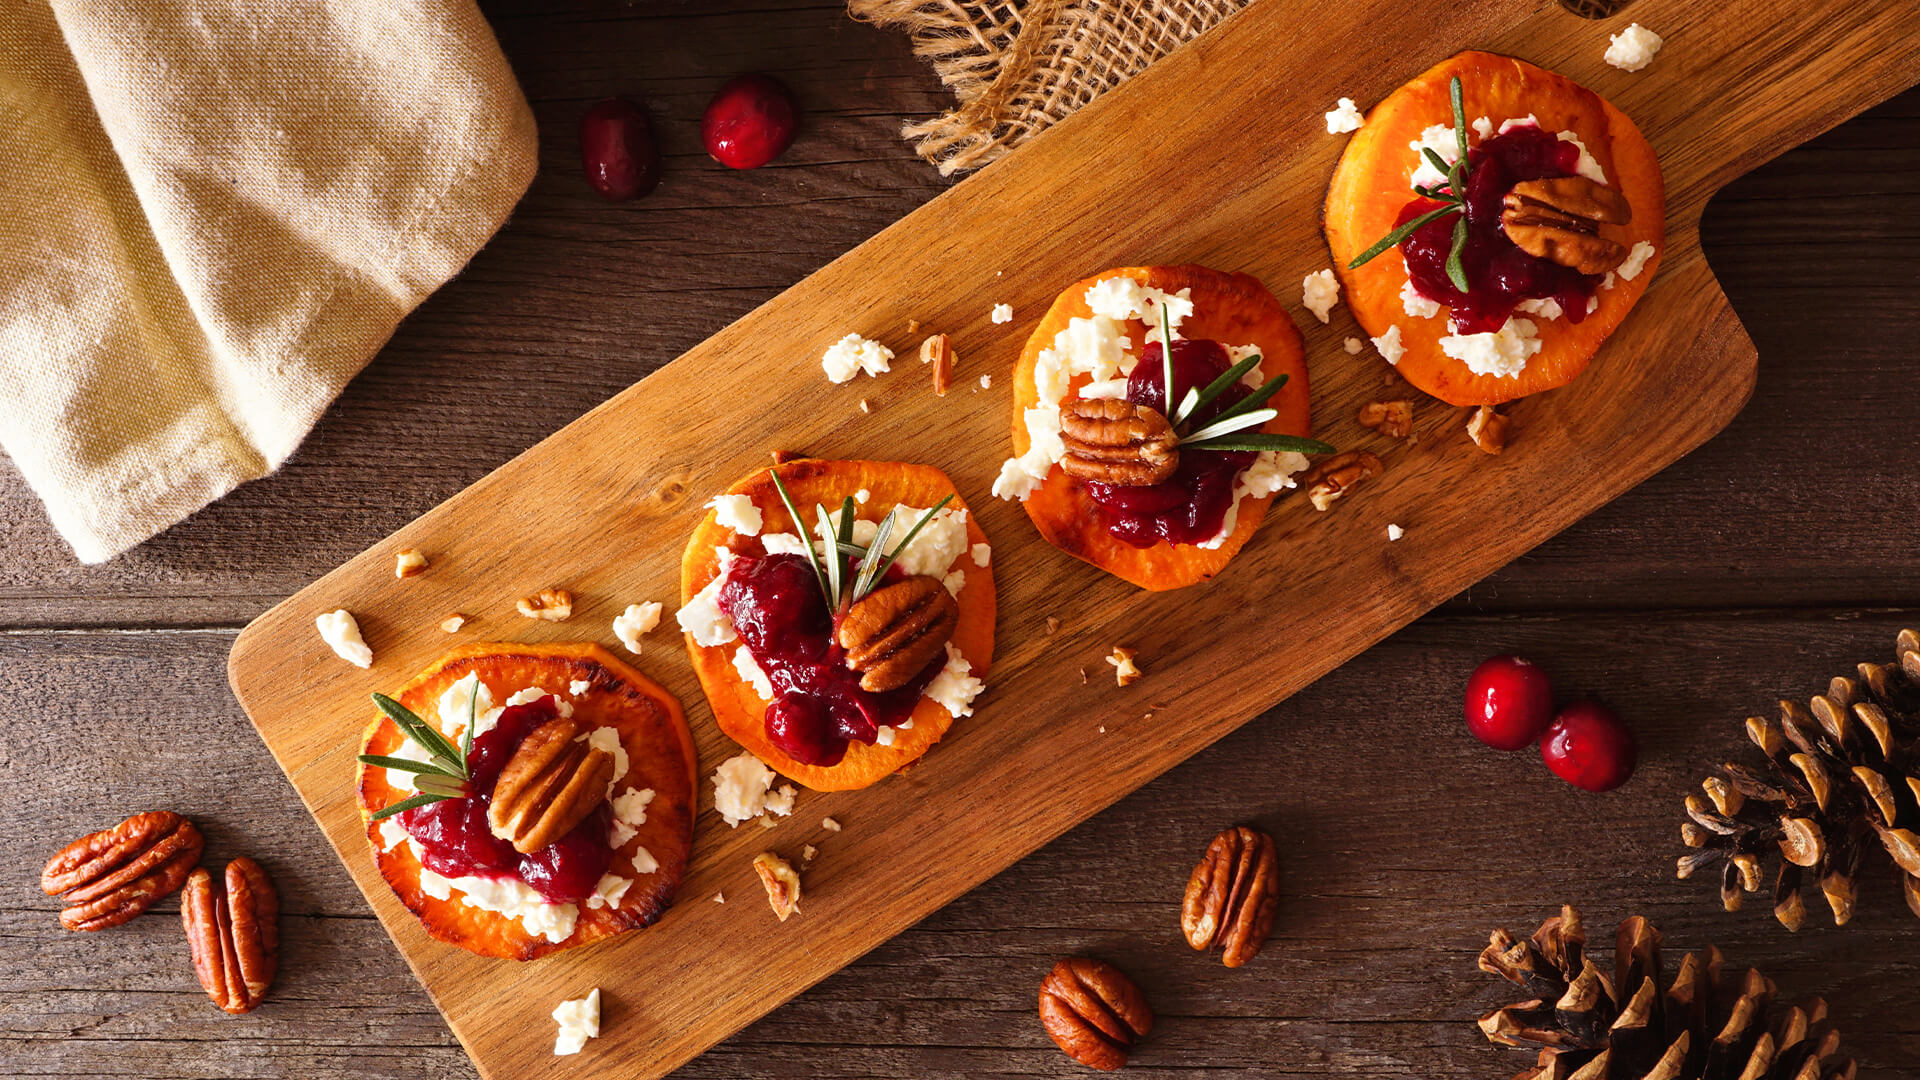 Festive sweet potato rounds topped with pecans, cranberry, rosemary, and goat chesse sit on a wood cutting board.